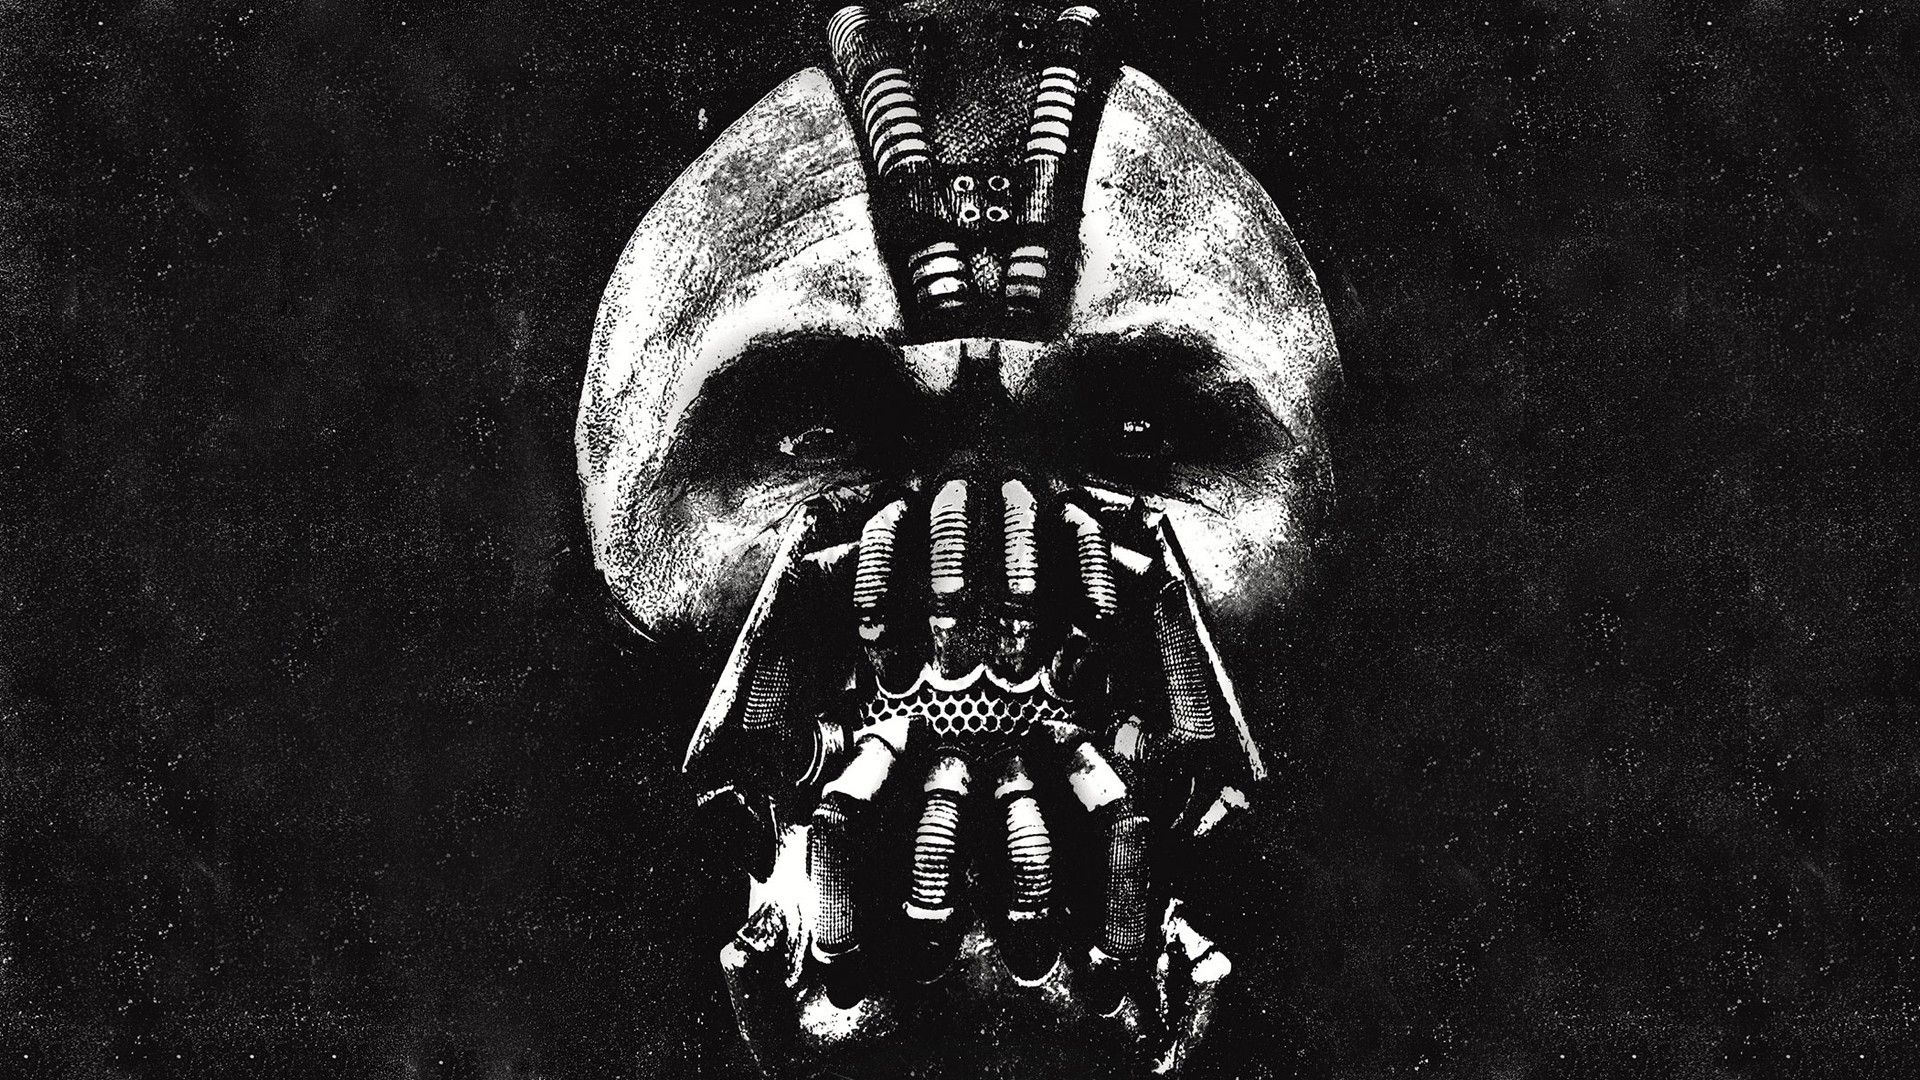 get out wallpaper,bane,supervillain,fictional character,black and white,illustration